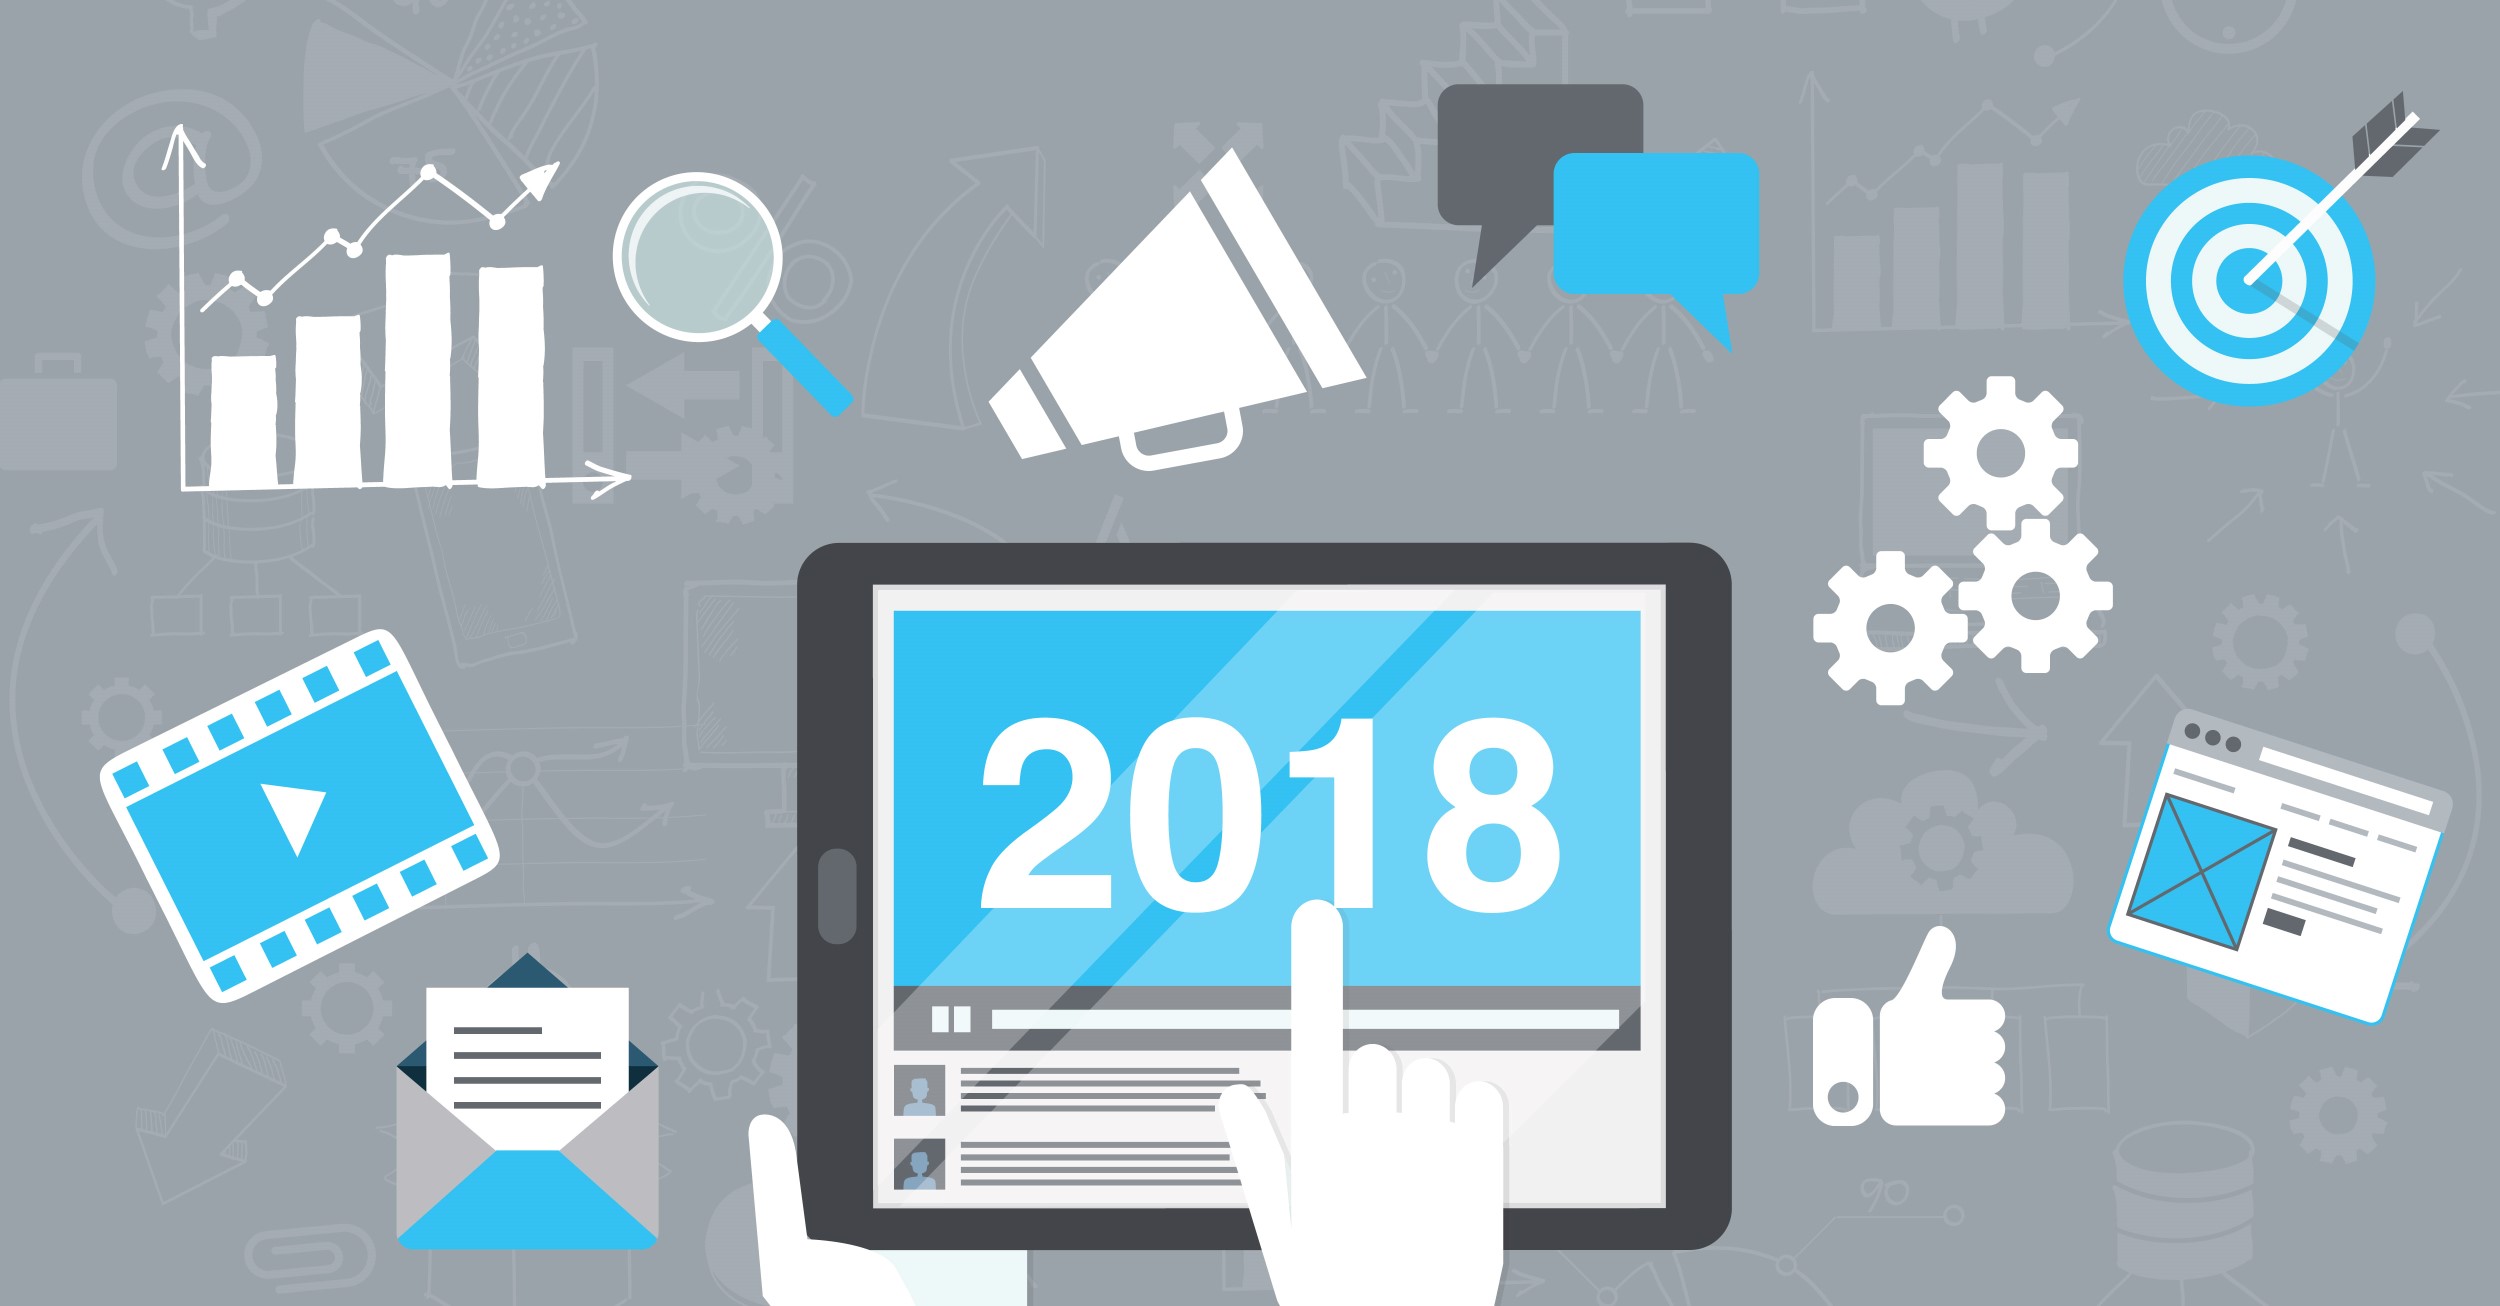 Facebook Target Marketing trends that will literally dominate 2018.